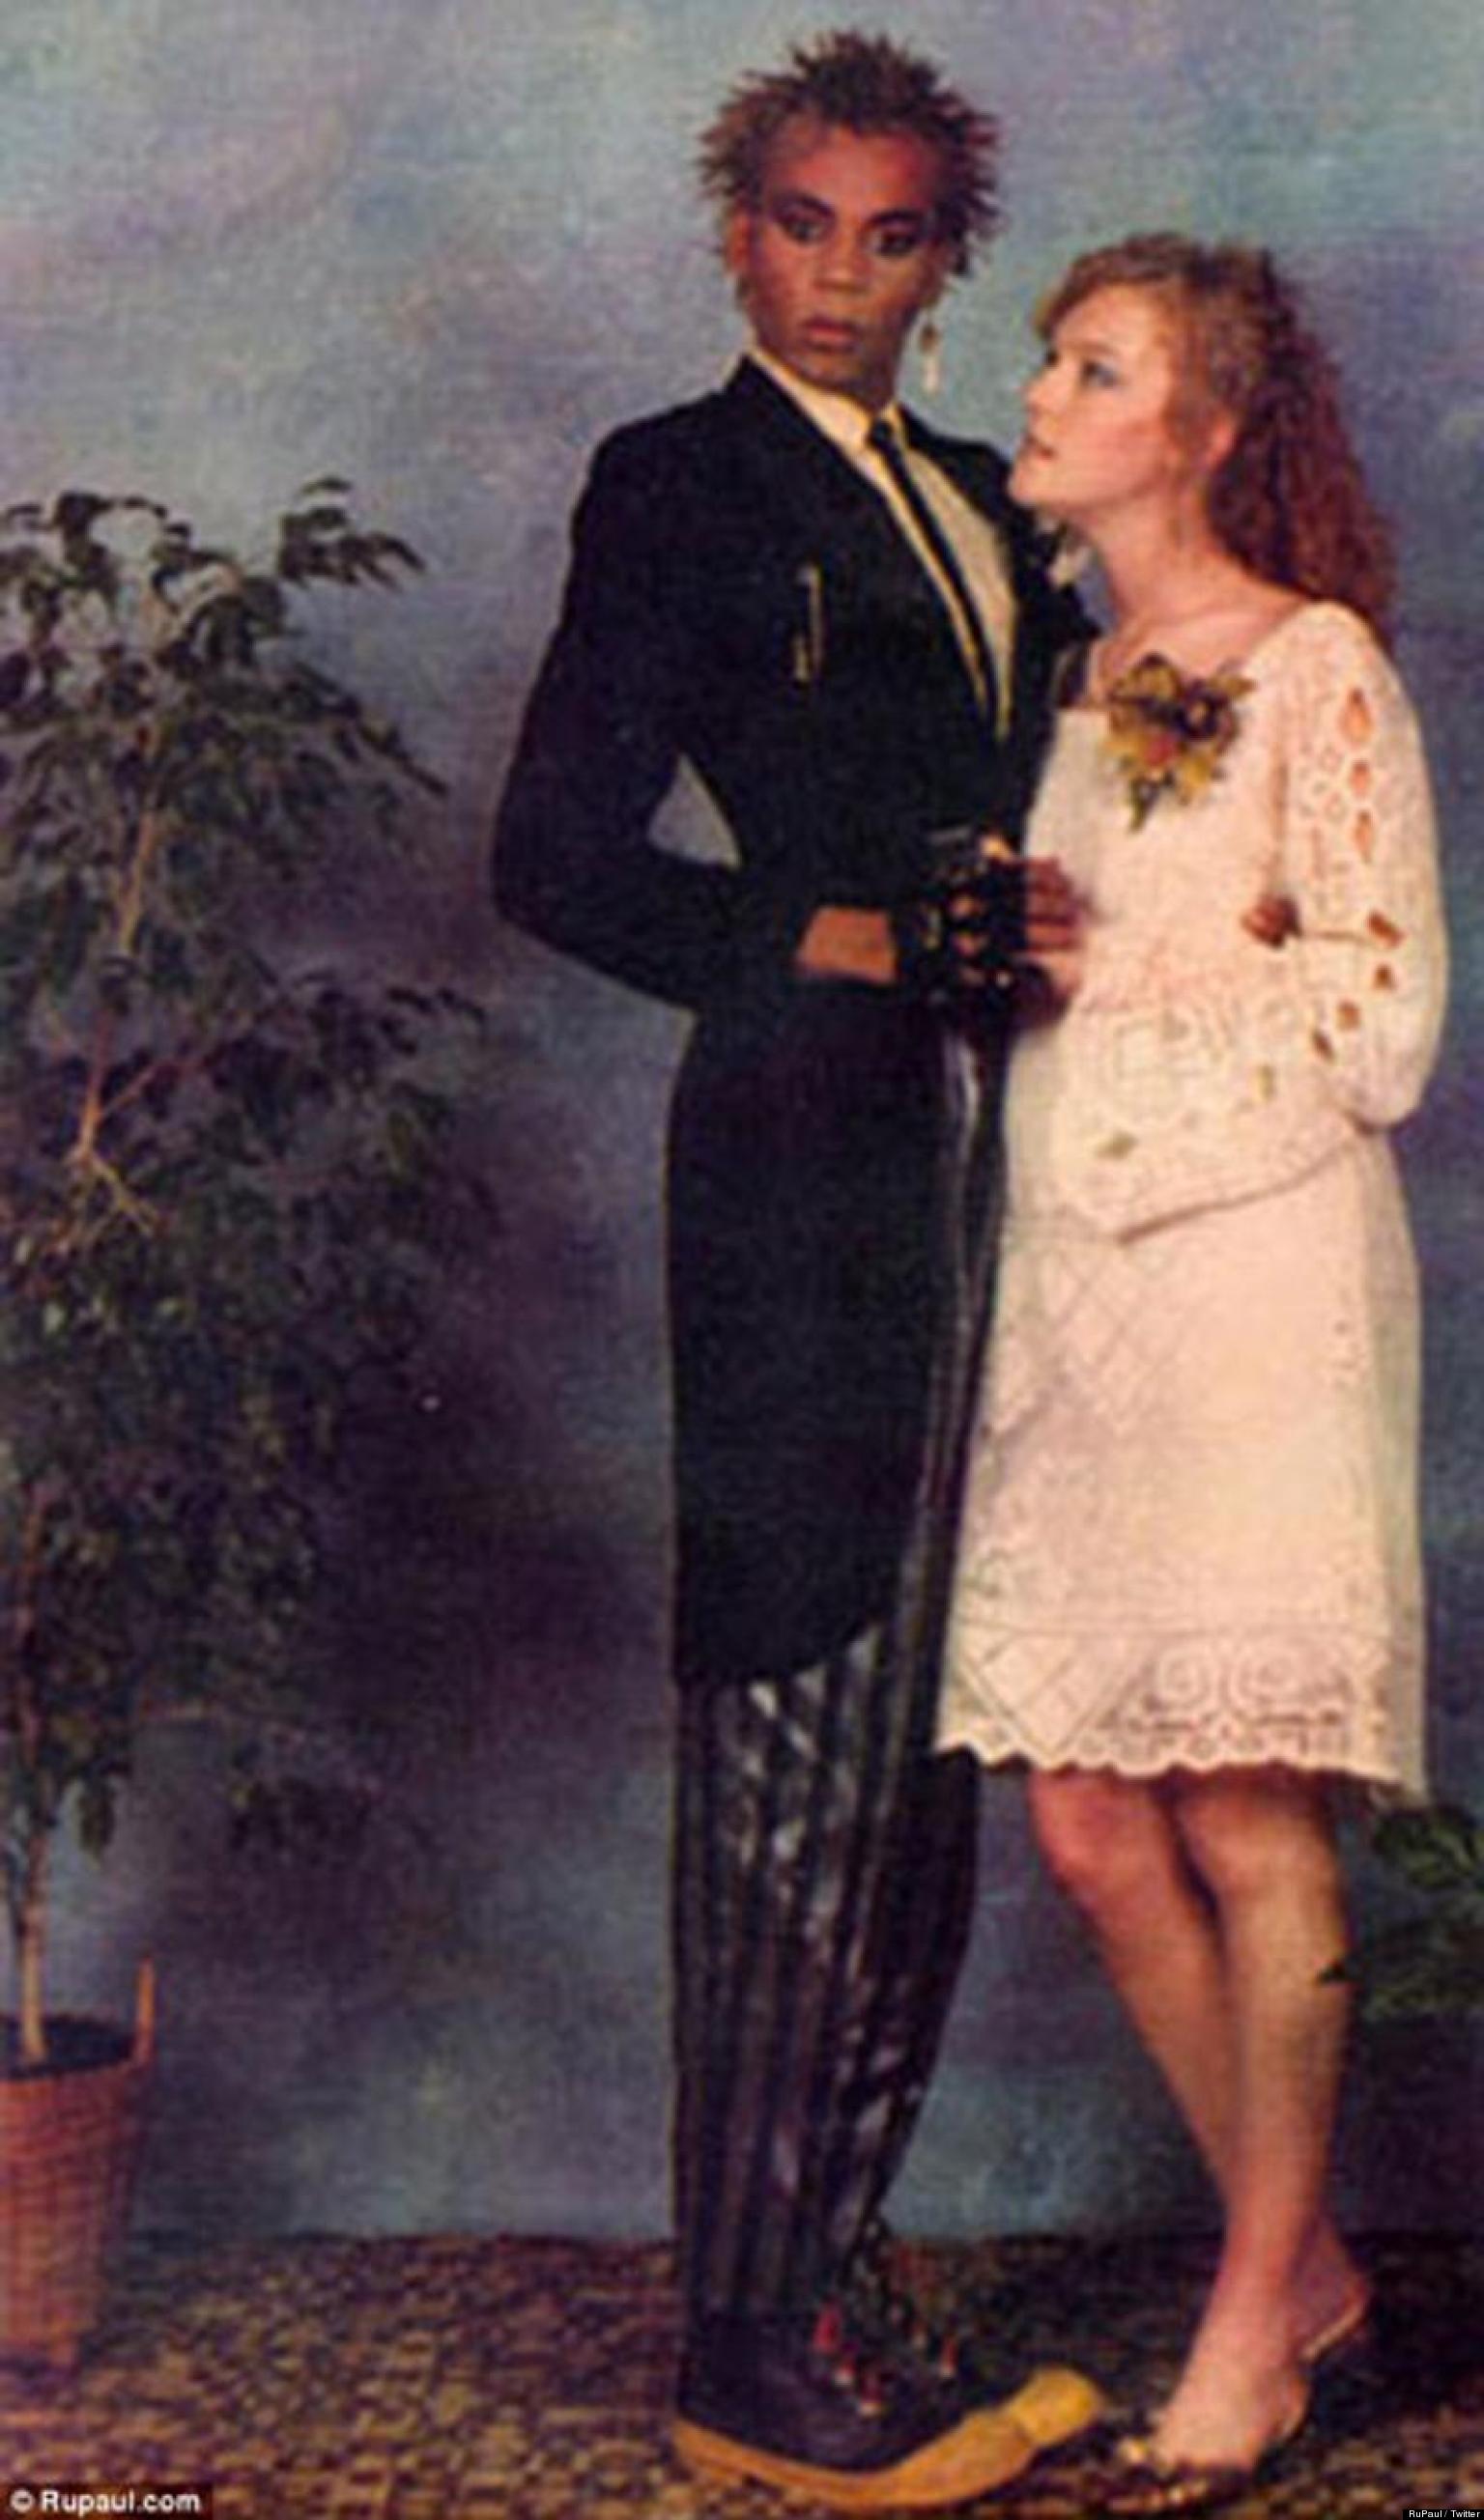 RuPaul's Prom Picture Shows Drag Queen Had It Going On Even In High School | HuffPost1536 x 2609